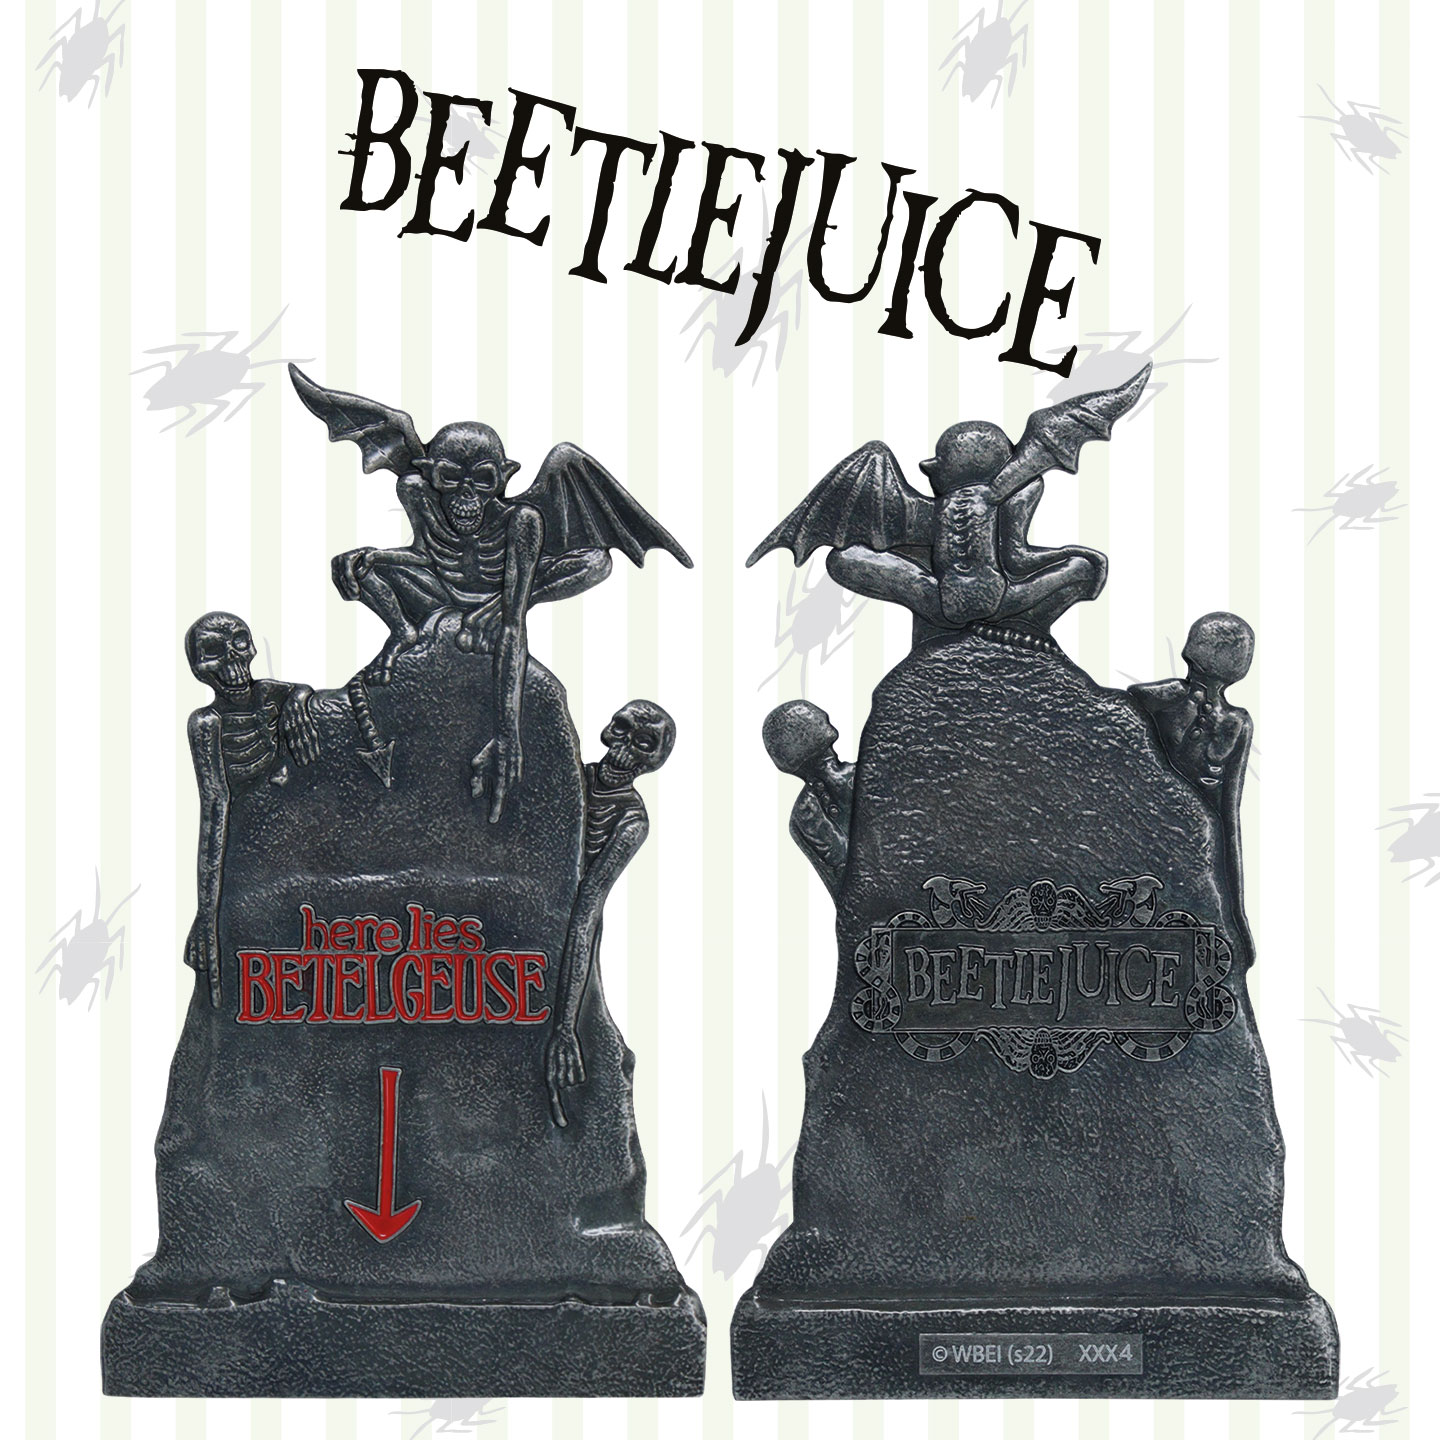 Image showing the product with the title Beetlejuice written above the product